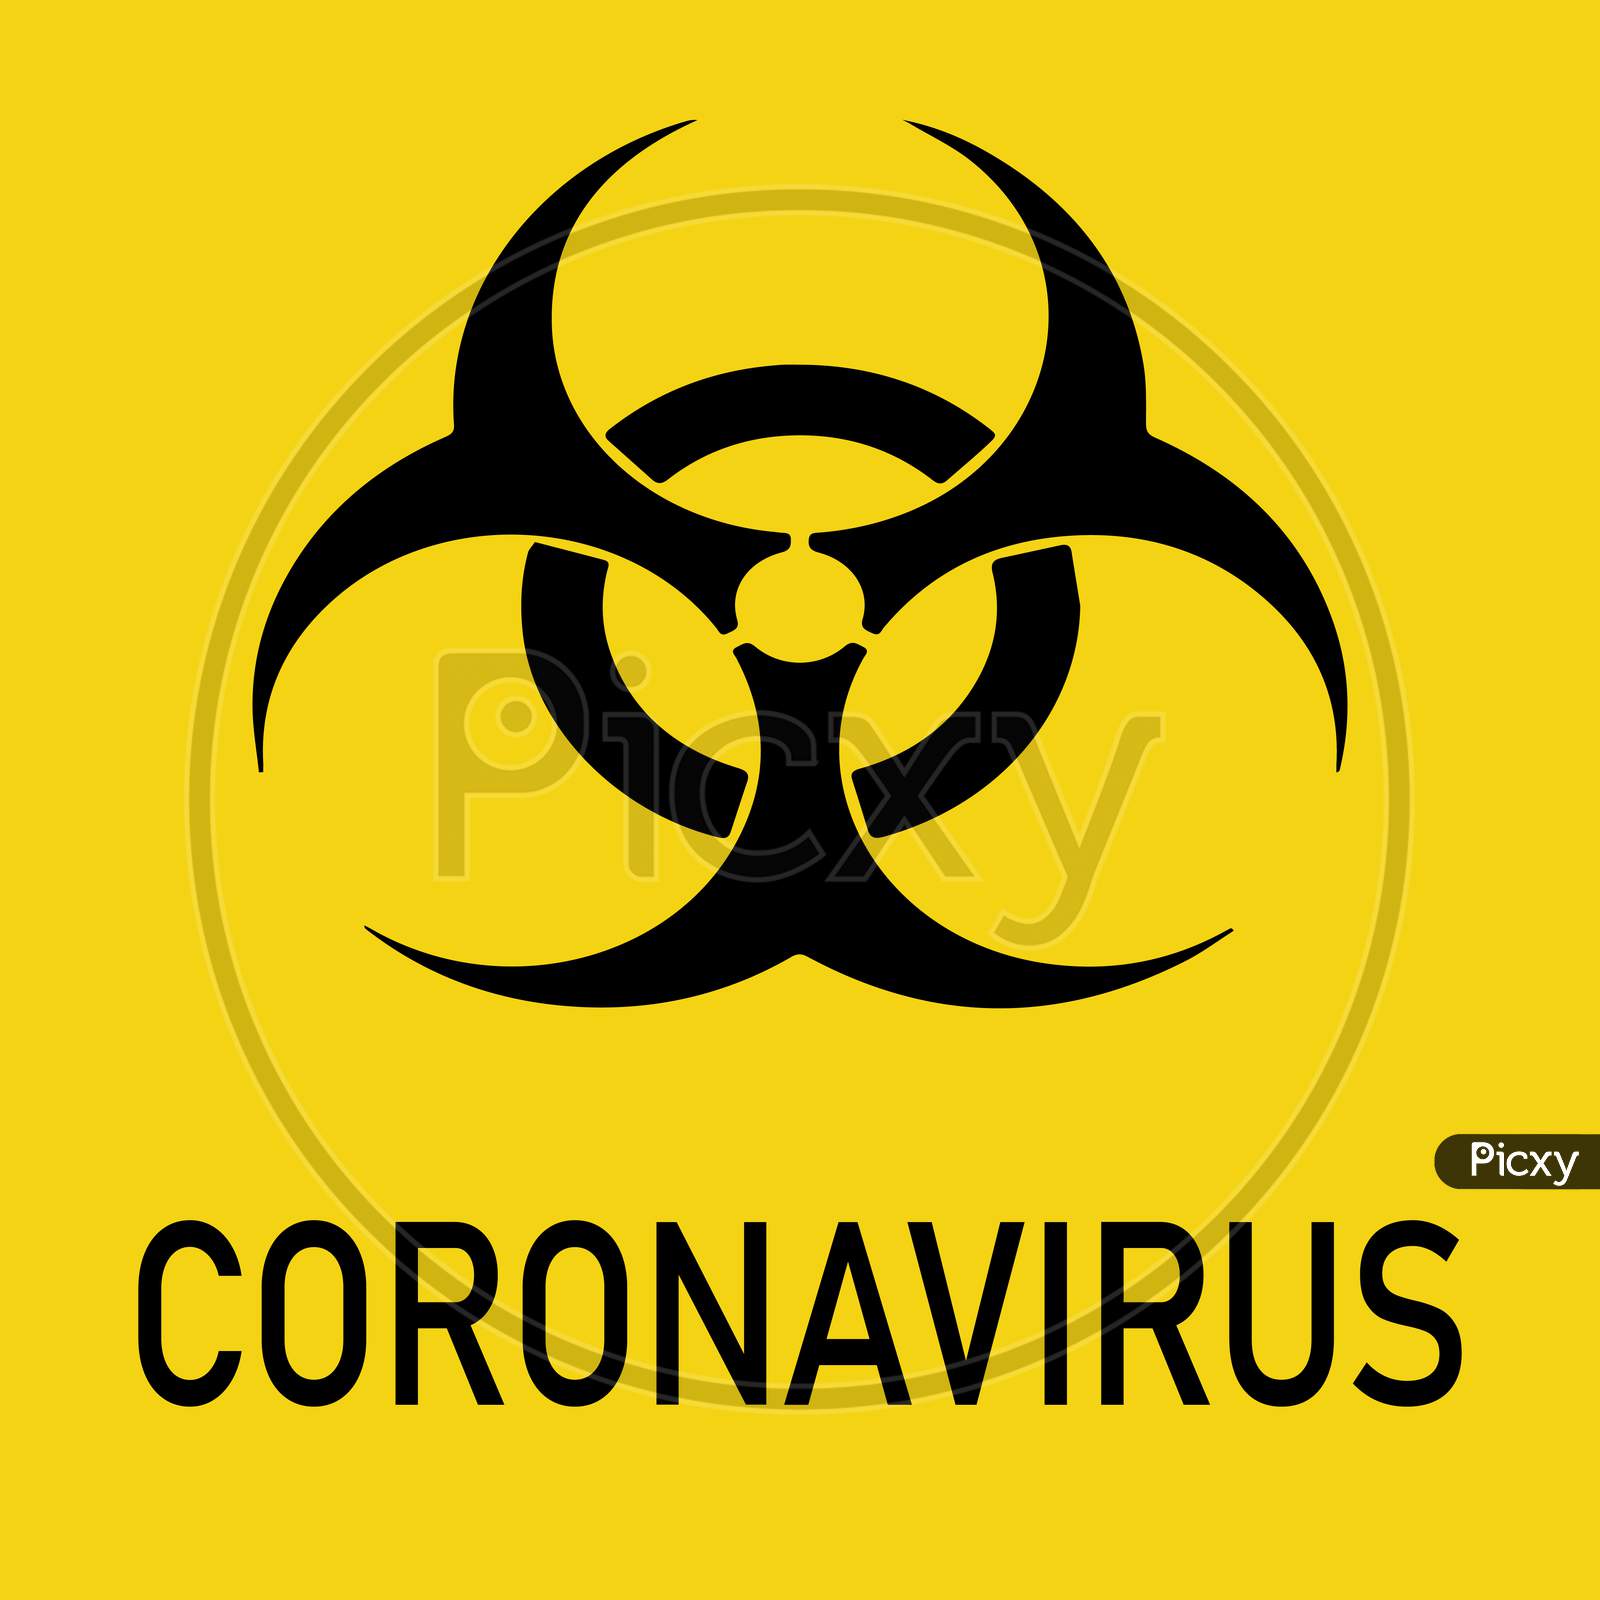 Coronavirus Biohazard Warning Poster. Vector Template For Posters, Banners, Advertising. Danger Of Infection From Coronavirus Sign. Concept.